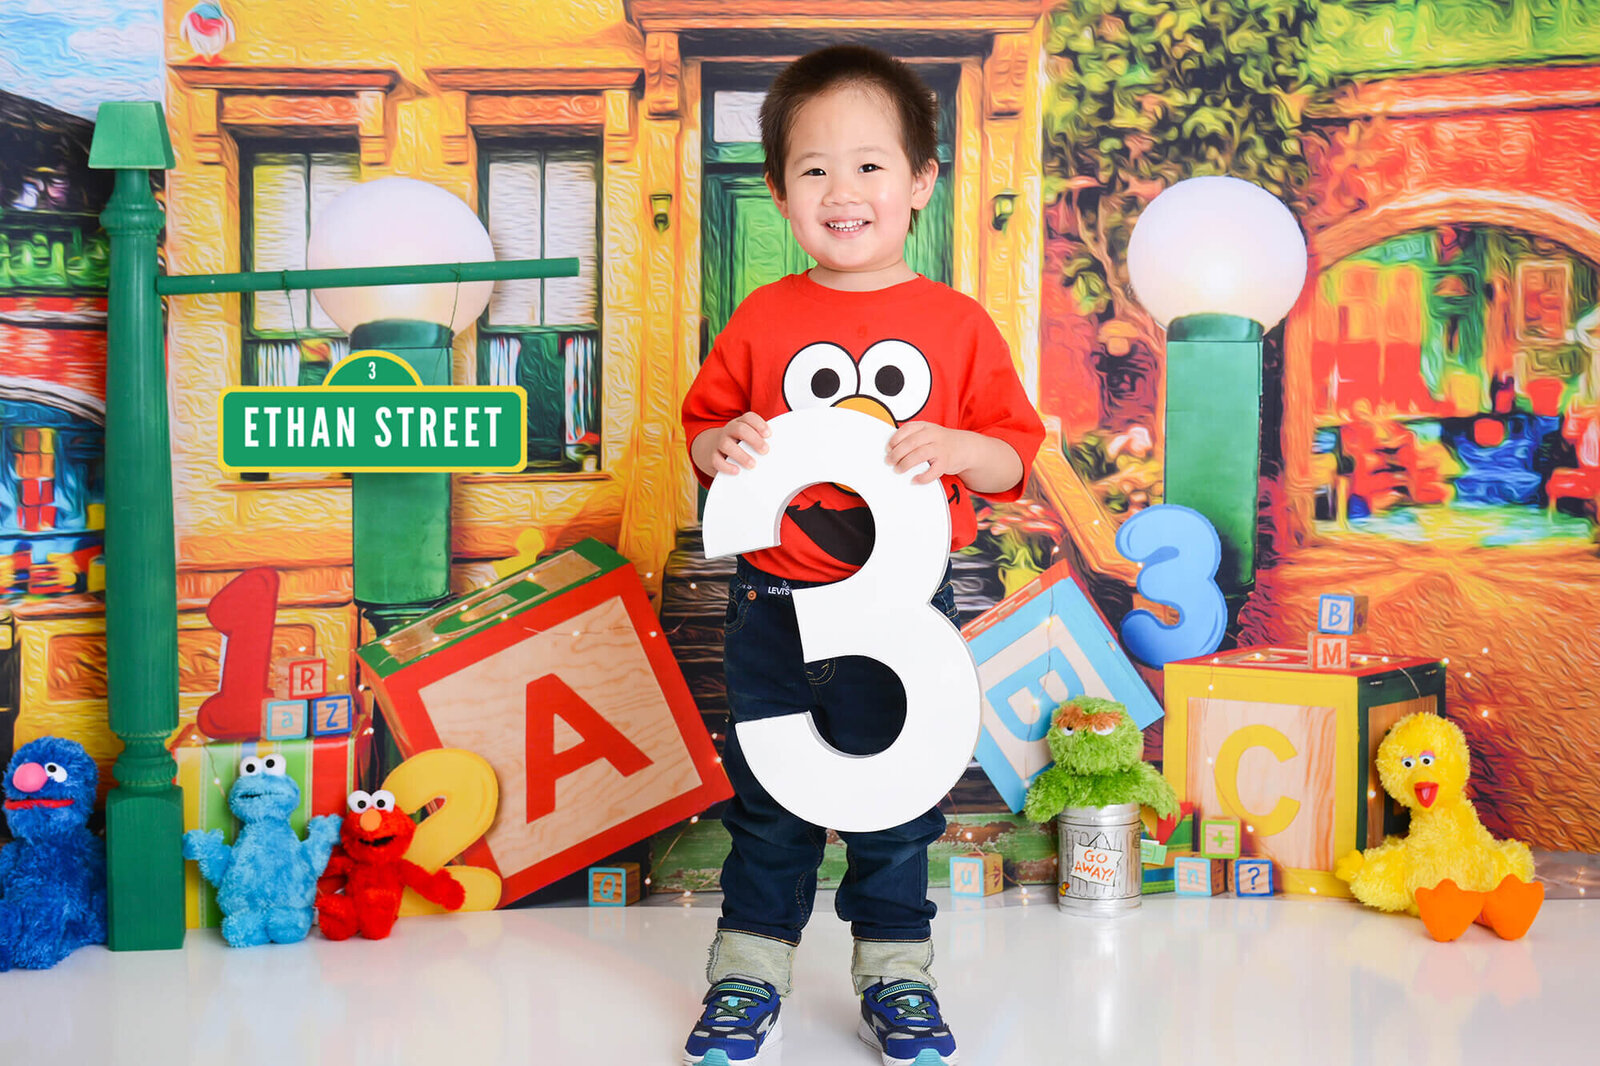 boy smiles while holding a 3 at his birthday photography shoot